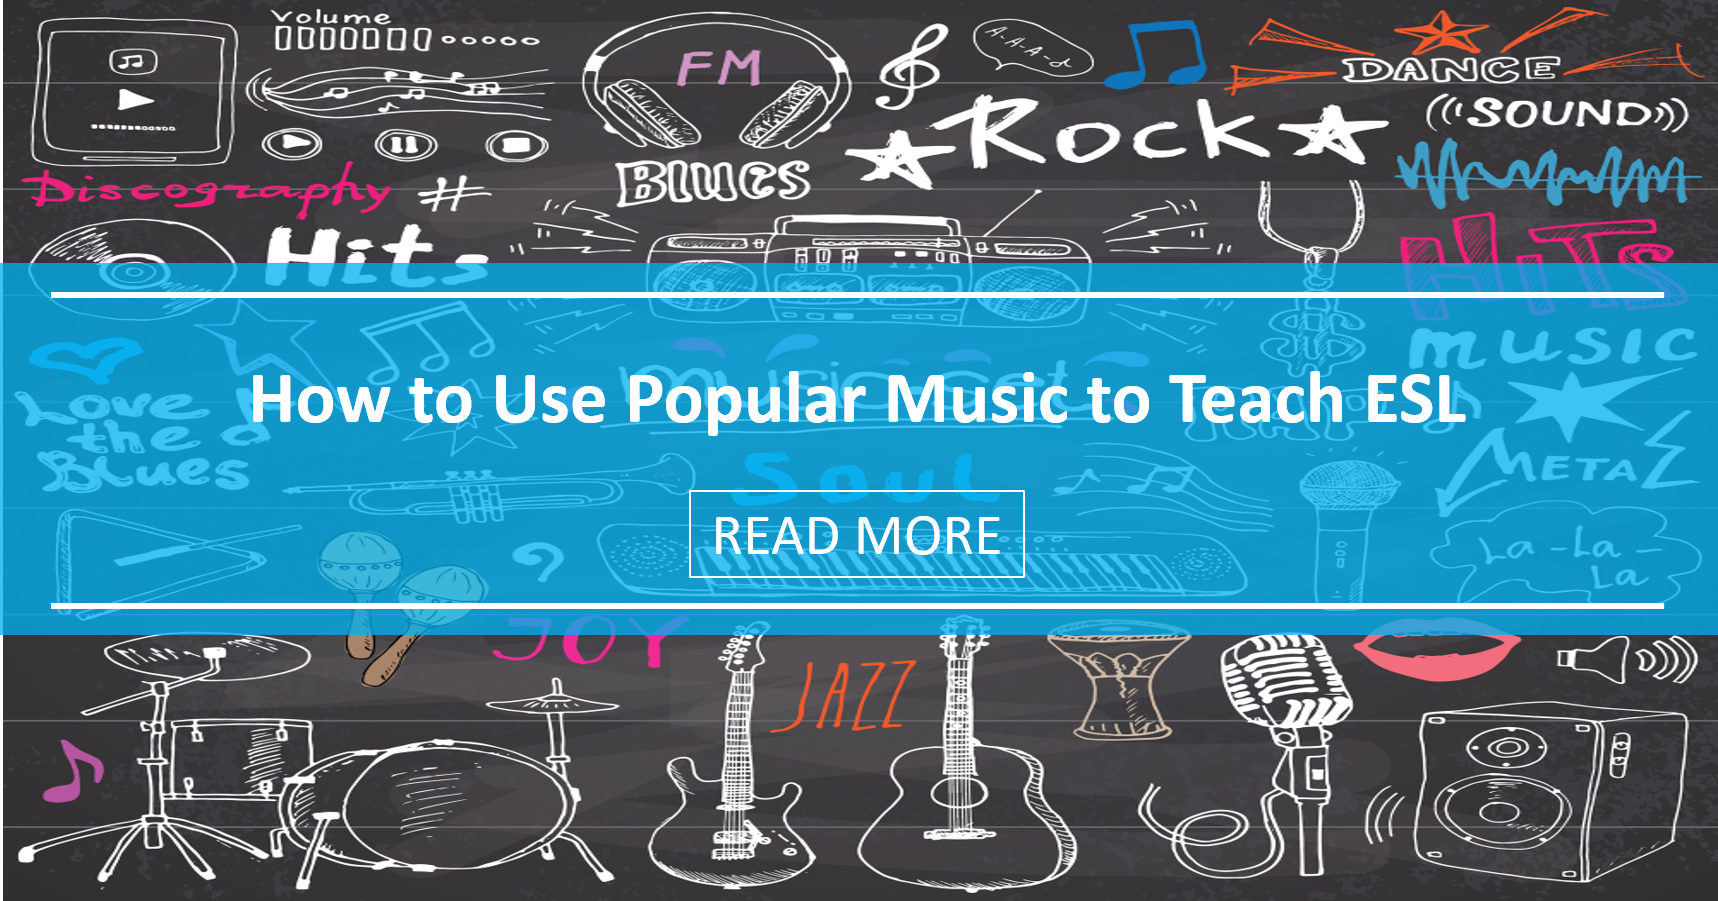 How to Use Popular Music to Teach ESL